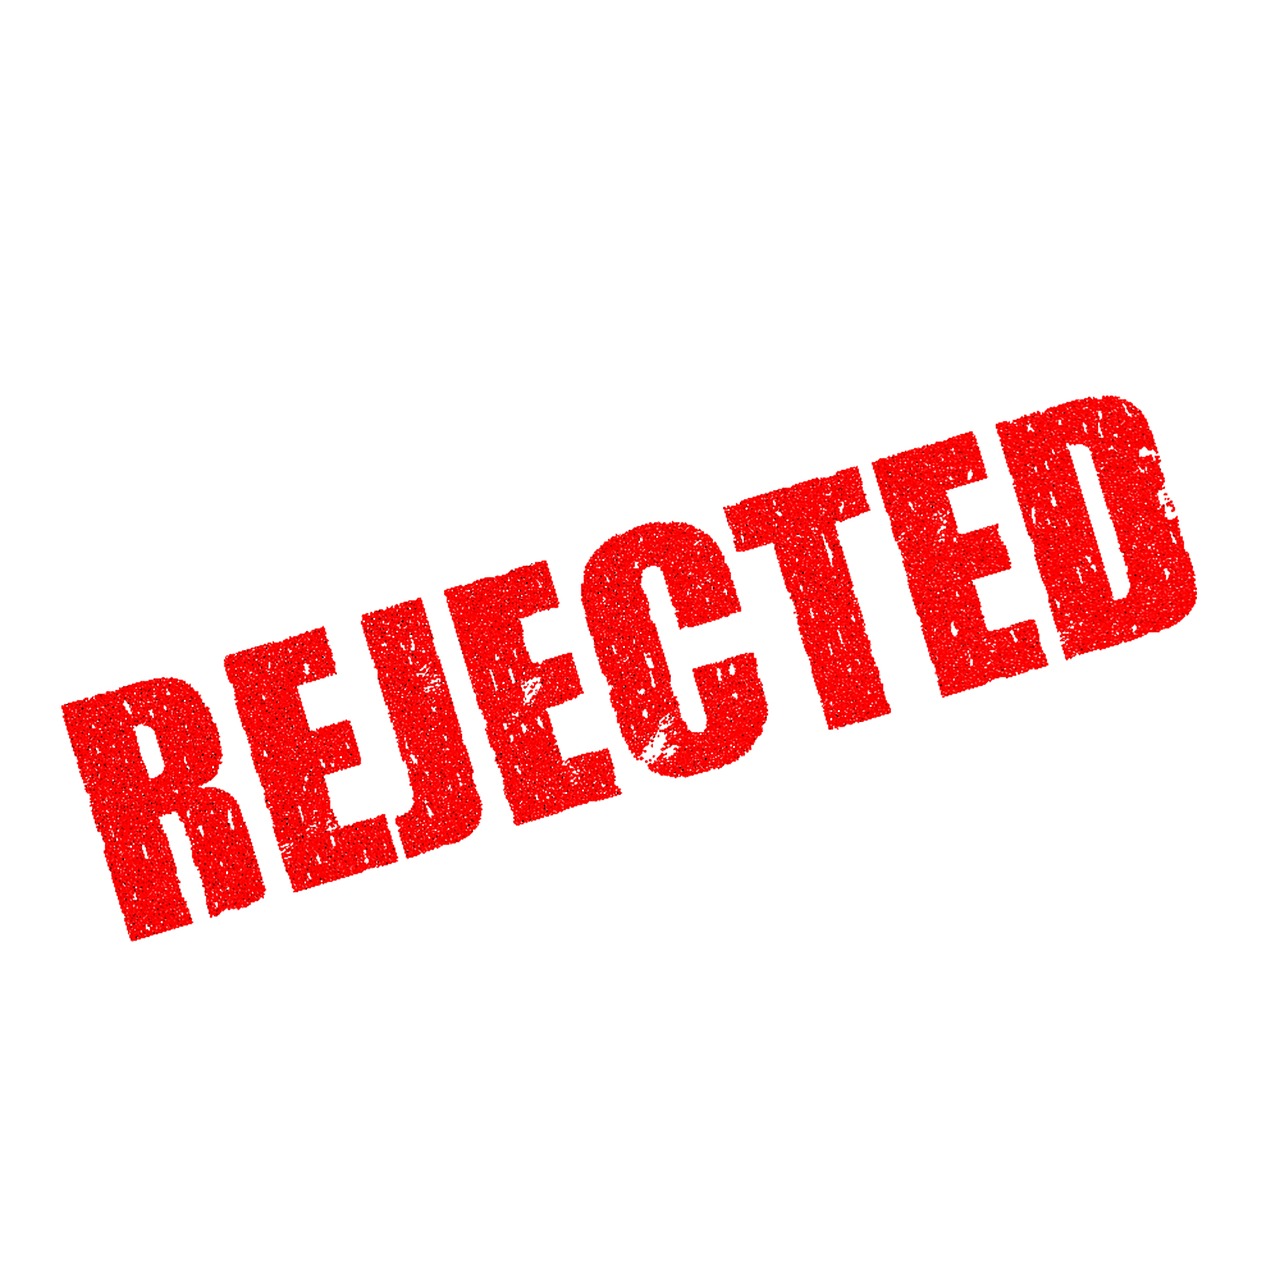 corporate filing rejections